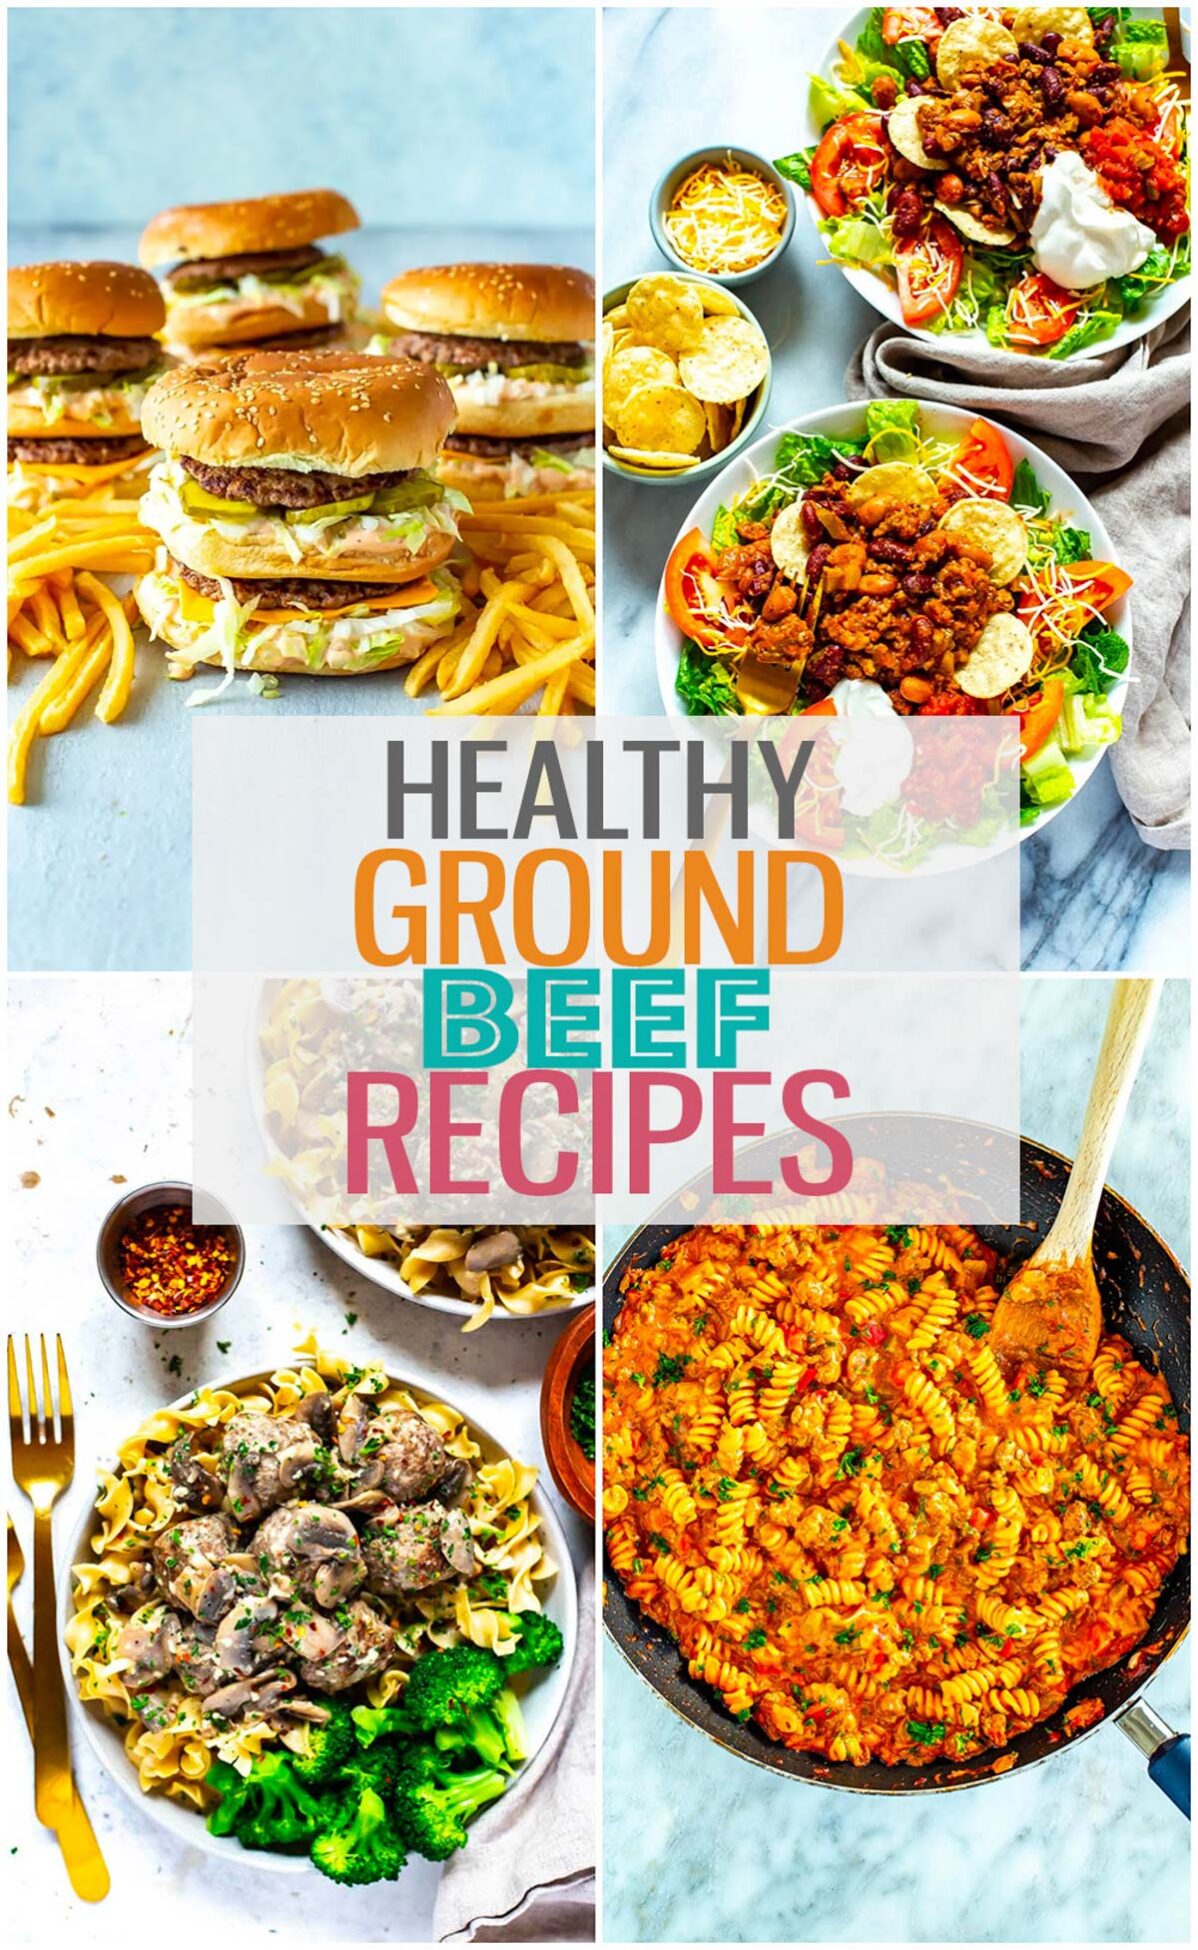 A collage of four different ground beef recipes with the text "Healthy Ground Beef Recipes" layered over top.